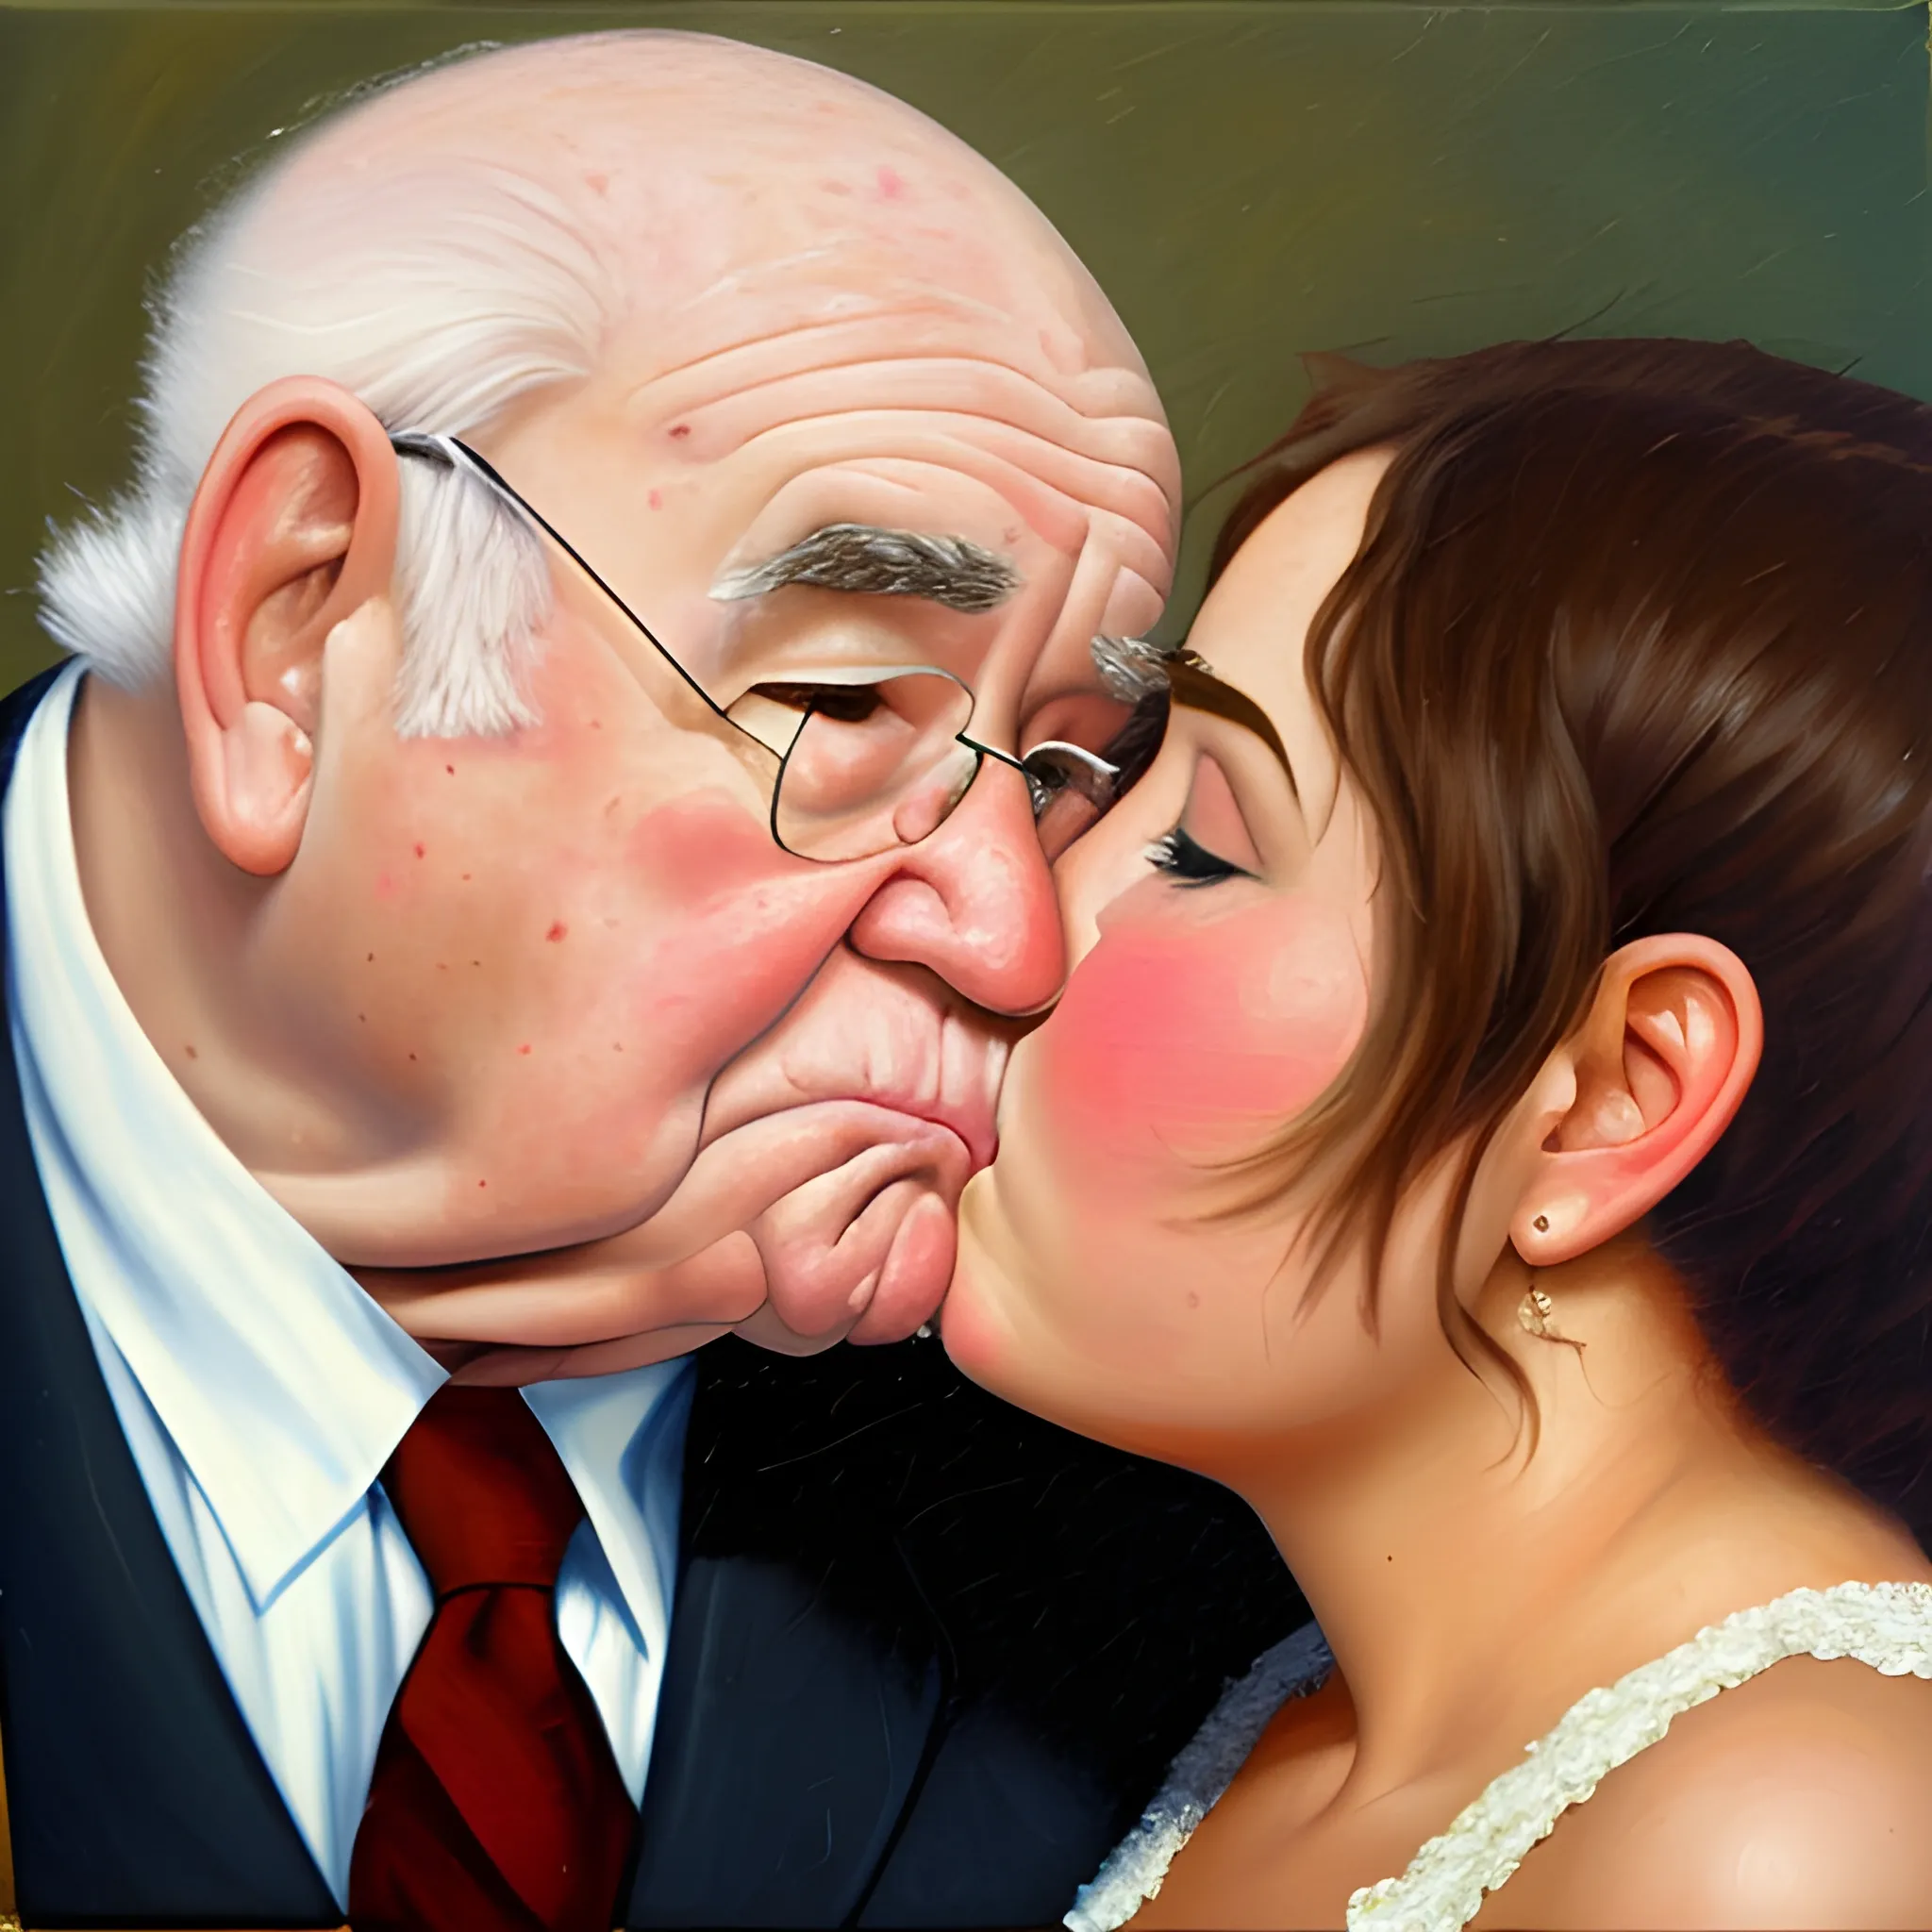 Ed Asner, chubby, kissing female , Oil Painting